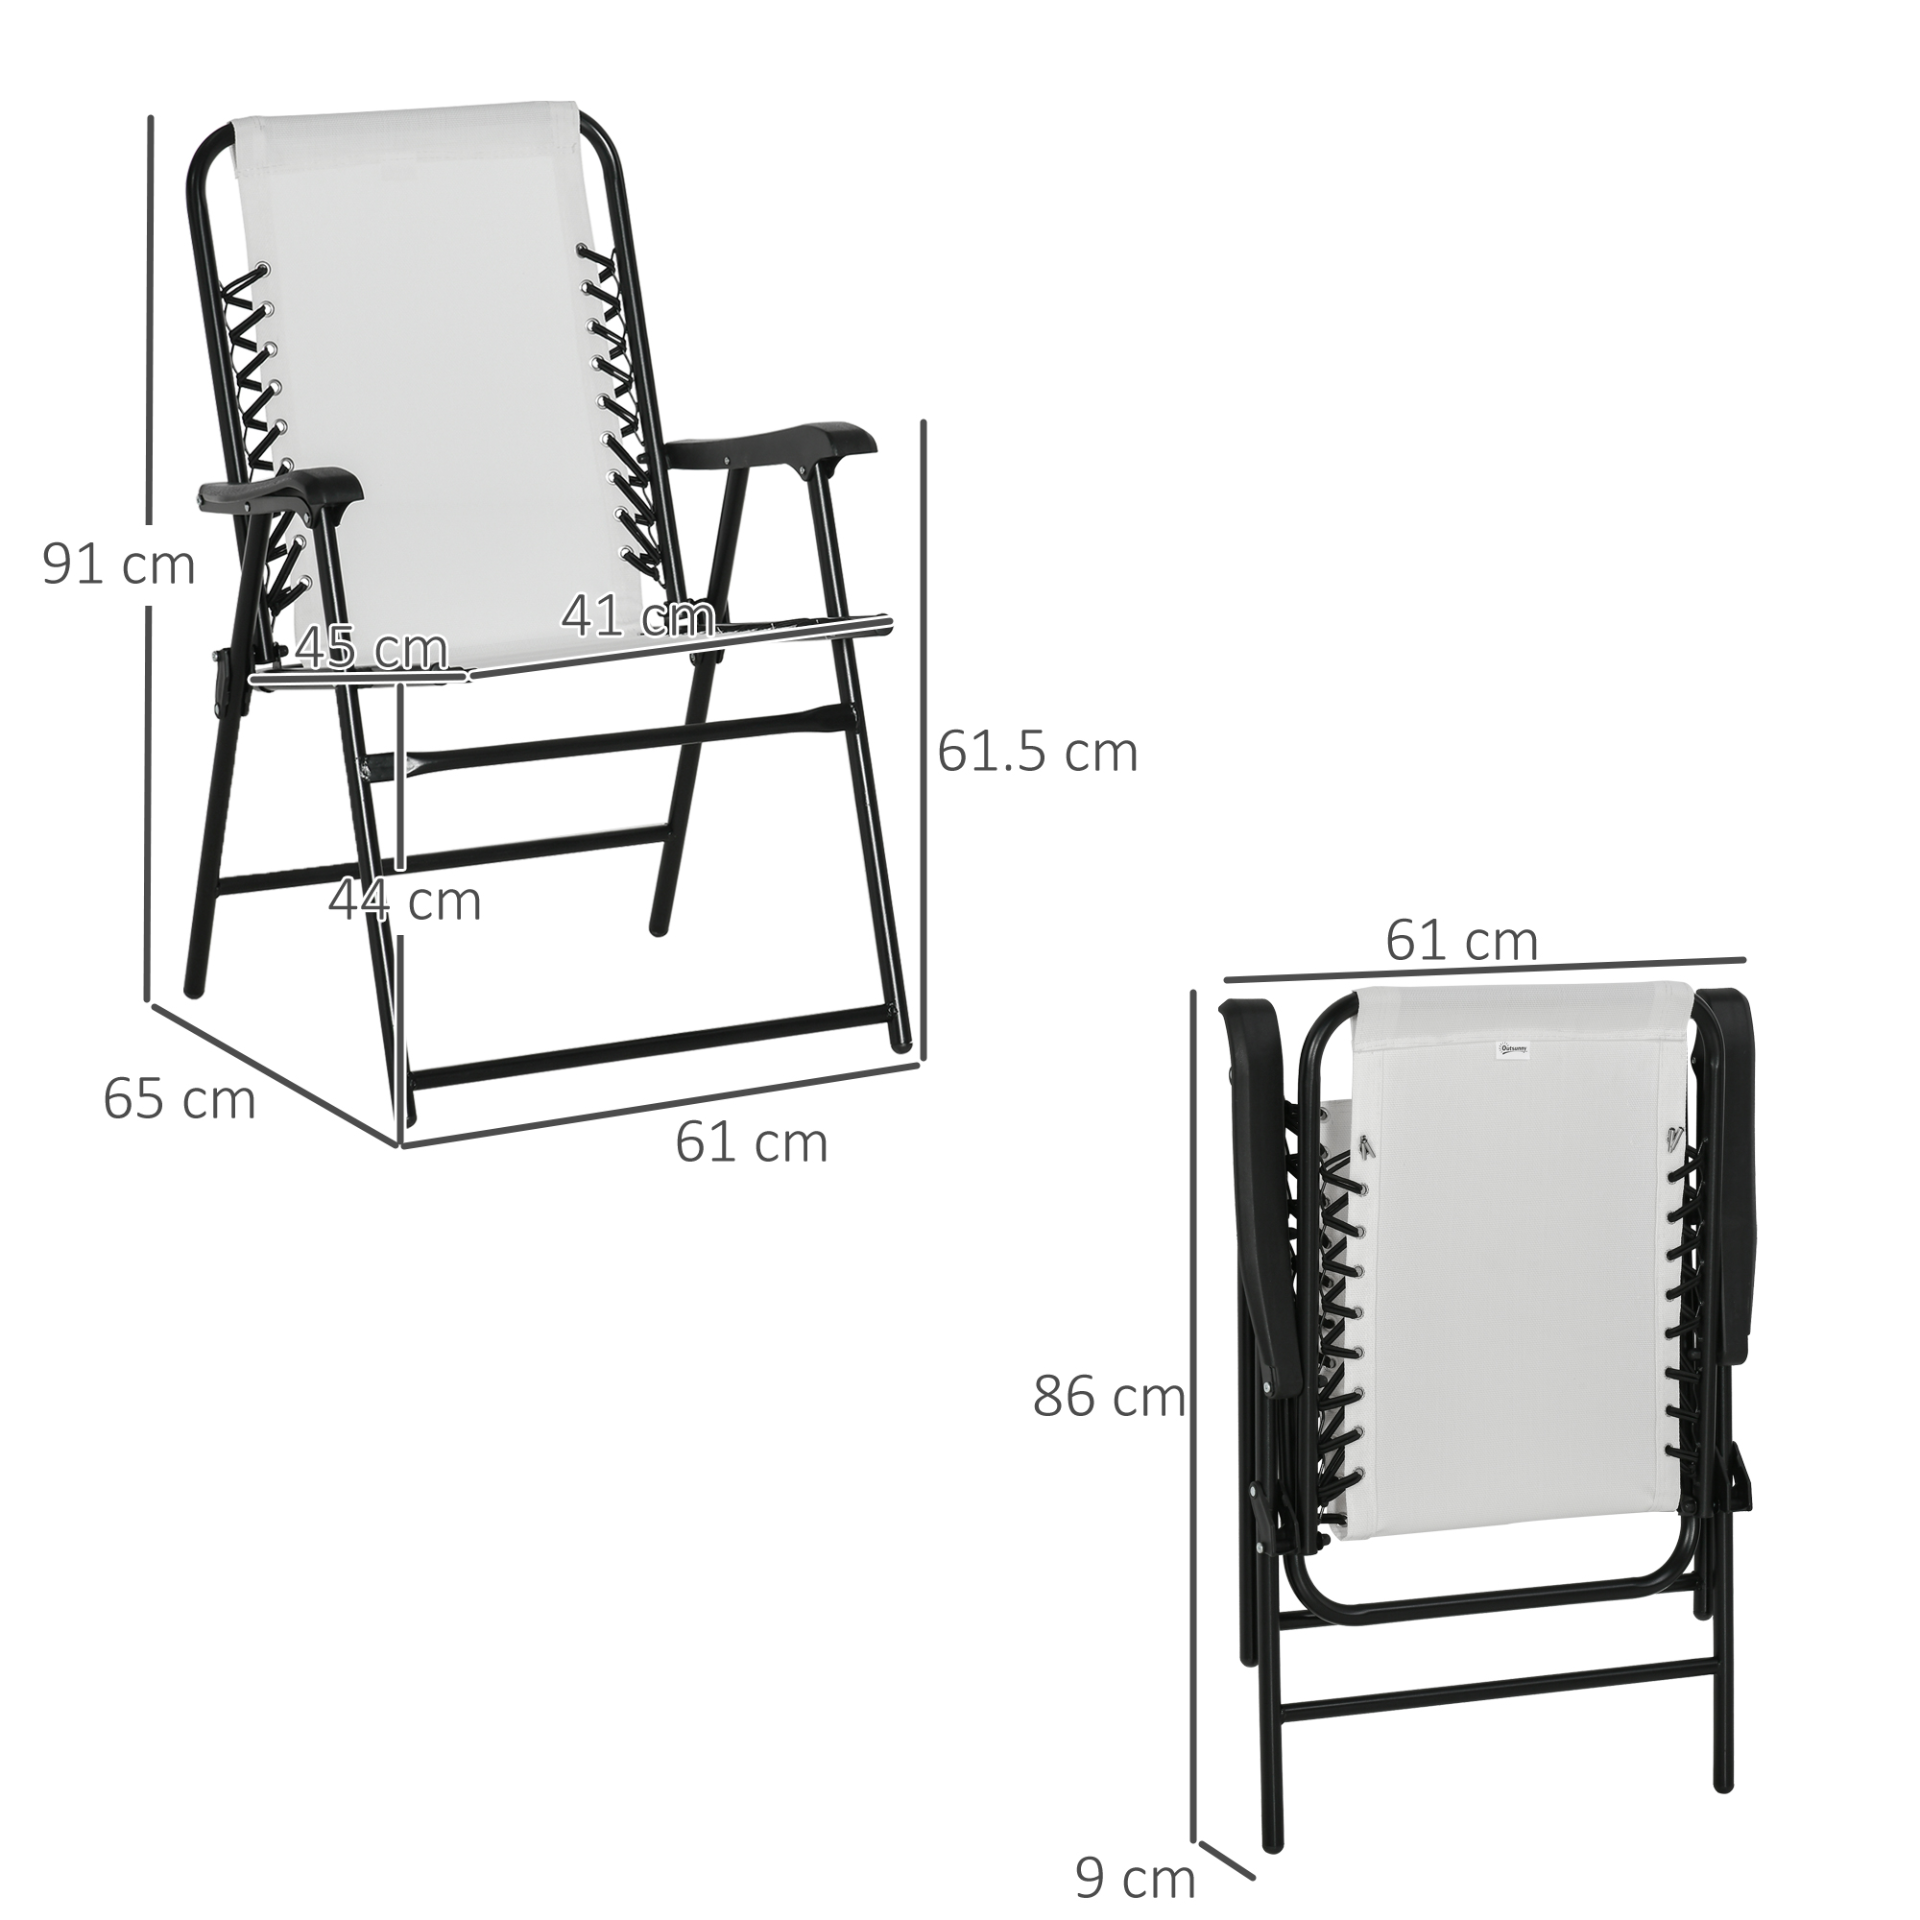 Outsunny Set of 2 Patio Folding Dining Chair Set Garden Outdoor Portable for Camping Pool Beach Deck Lawn with Armrest, Cream White Camping Chair Cosy Camping Co.   